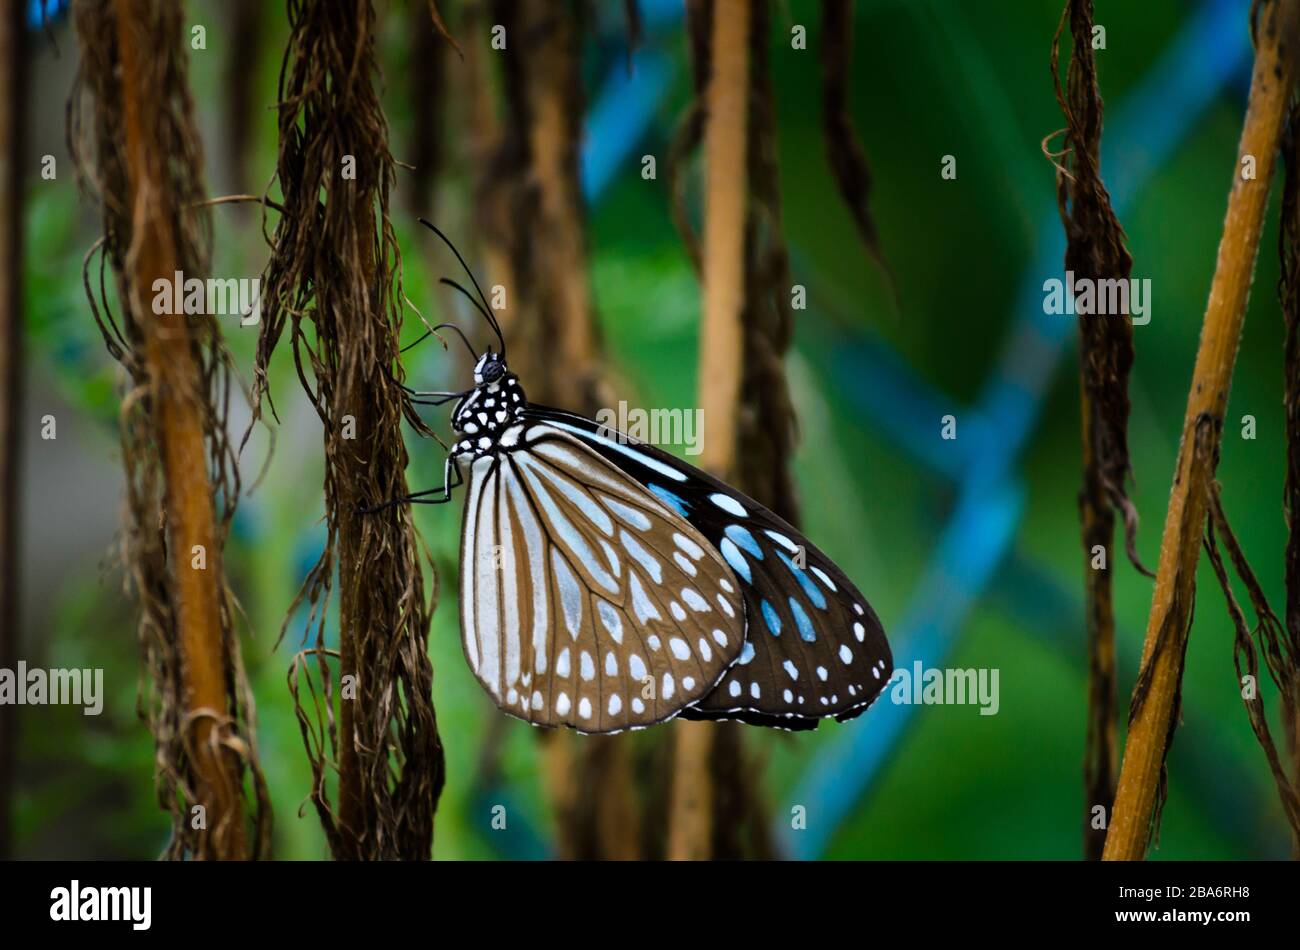 Glassy Blue Tiger Butterfly resting on dead dill, aromatic herb with delicate, feathery green leaves. Stock Photo